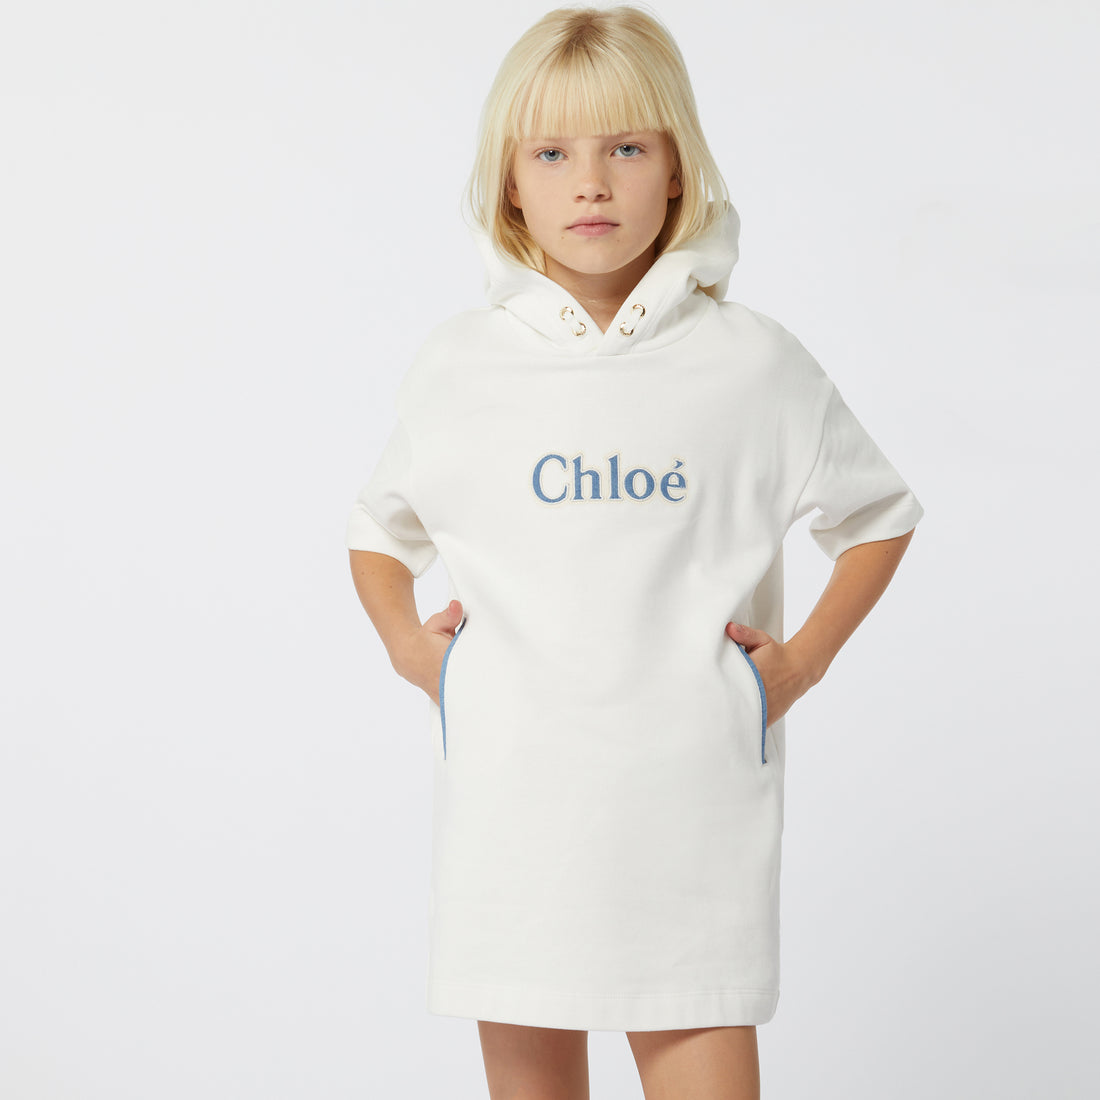 Chloe Hooded Dress Offwhite - Cozy and Stylish for Any Season | Schools Out